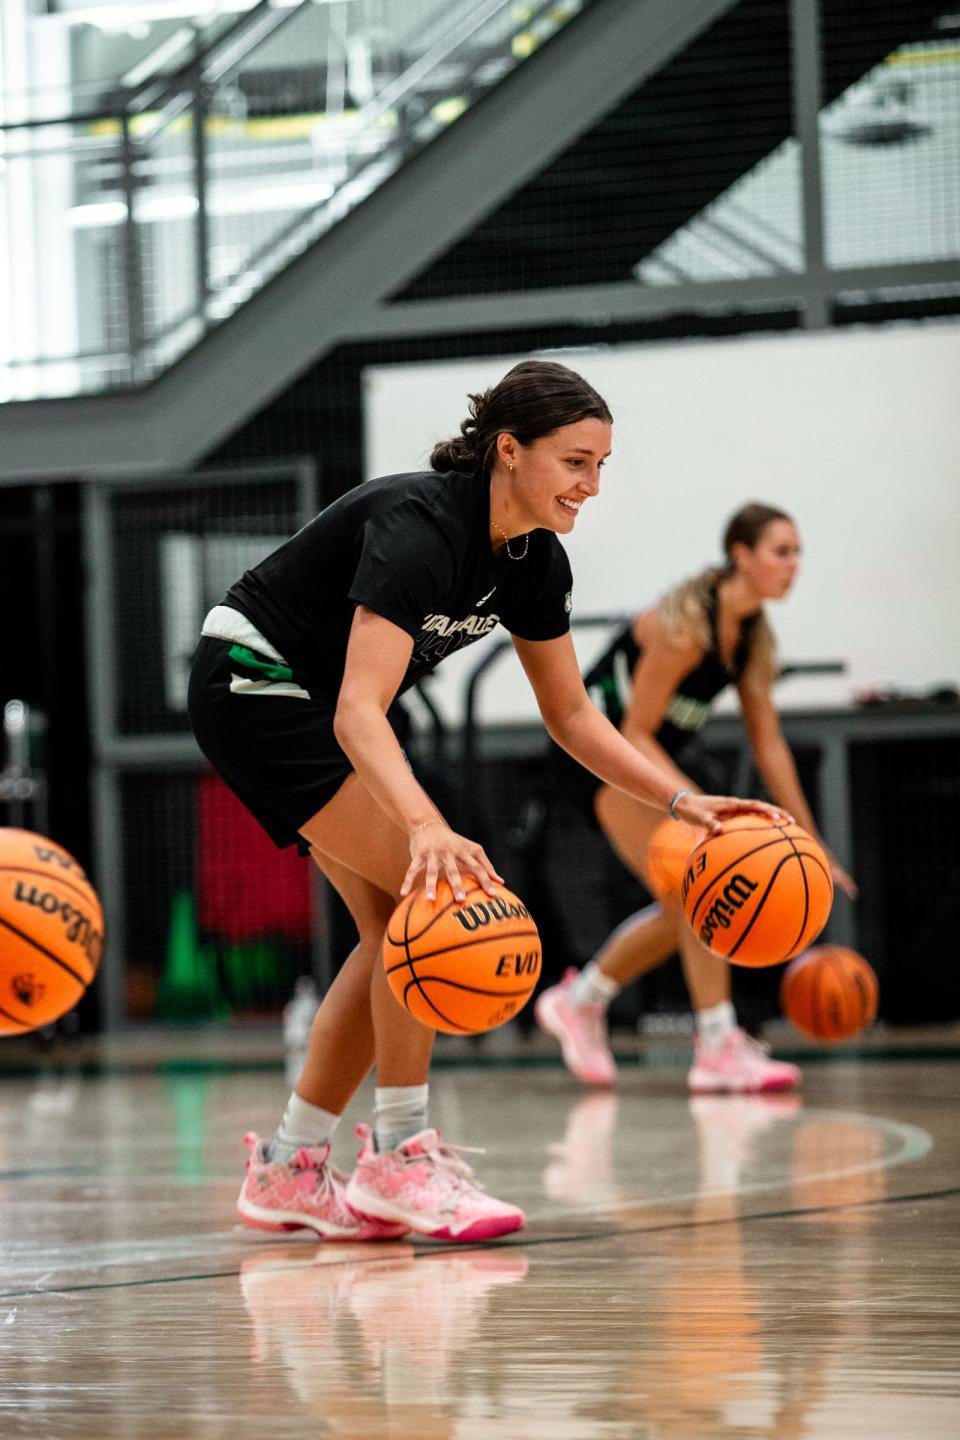 Abby Hendricks dribbling basketballs during a practice with the team. | Natalie Grover, for the Deseret News